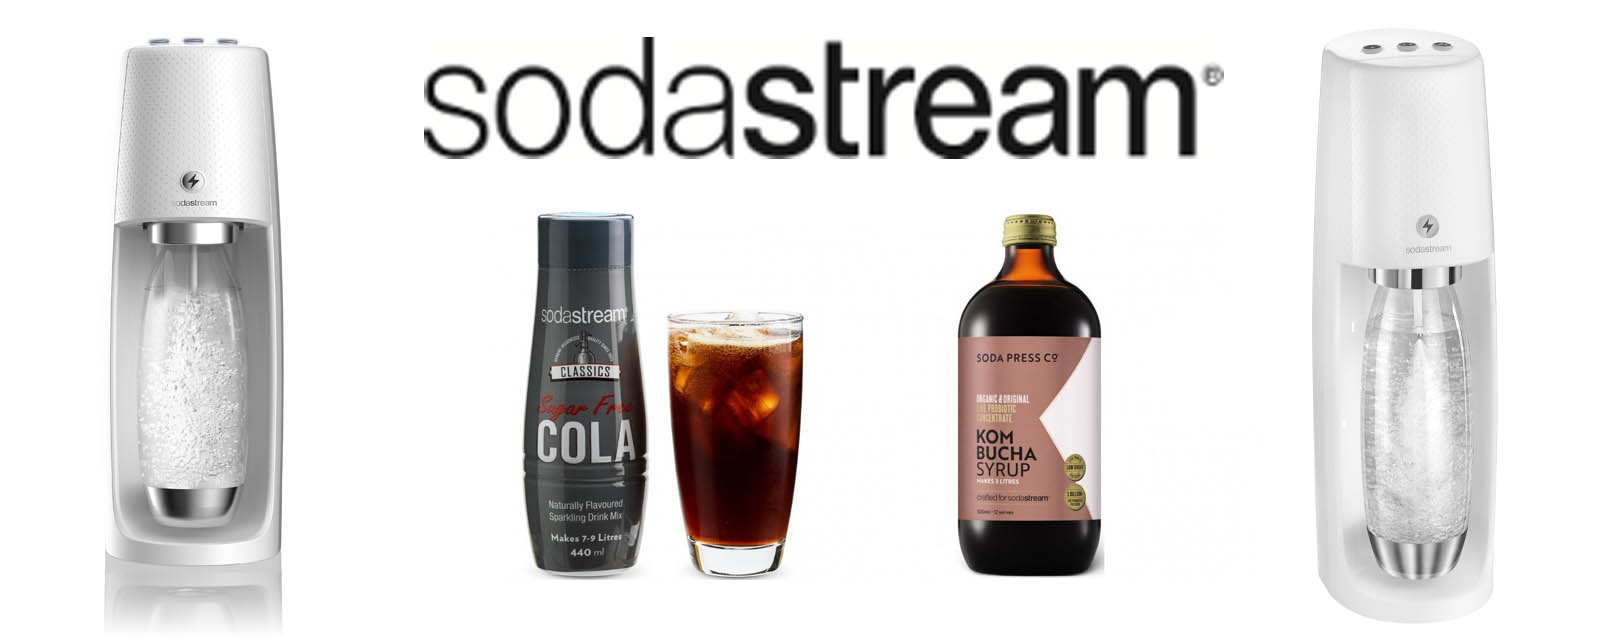 https://www.harveynorman.com.au/blog/assets/SodaStream-Spirit-One-Touch-Sparkling-Water-Maker-and-flavours.jpg